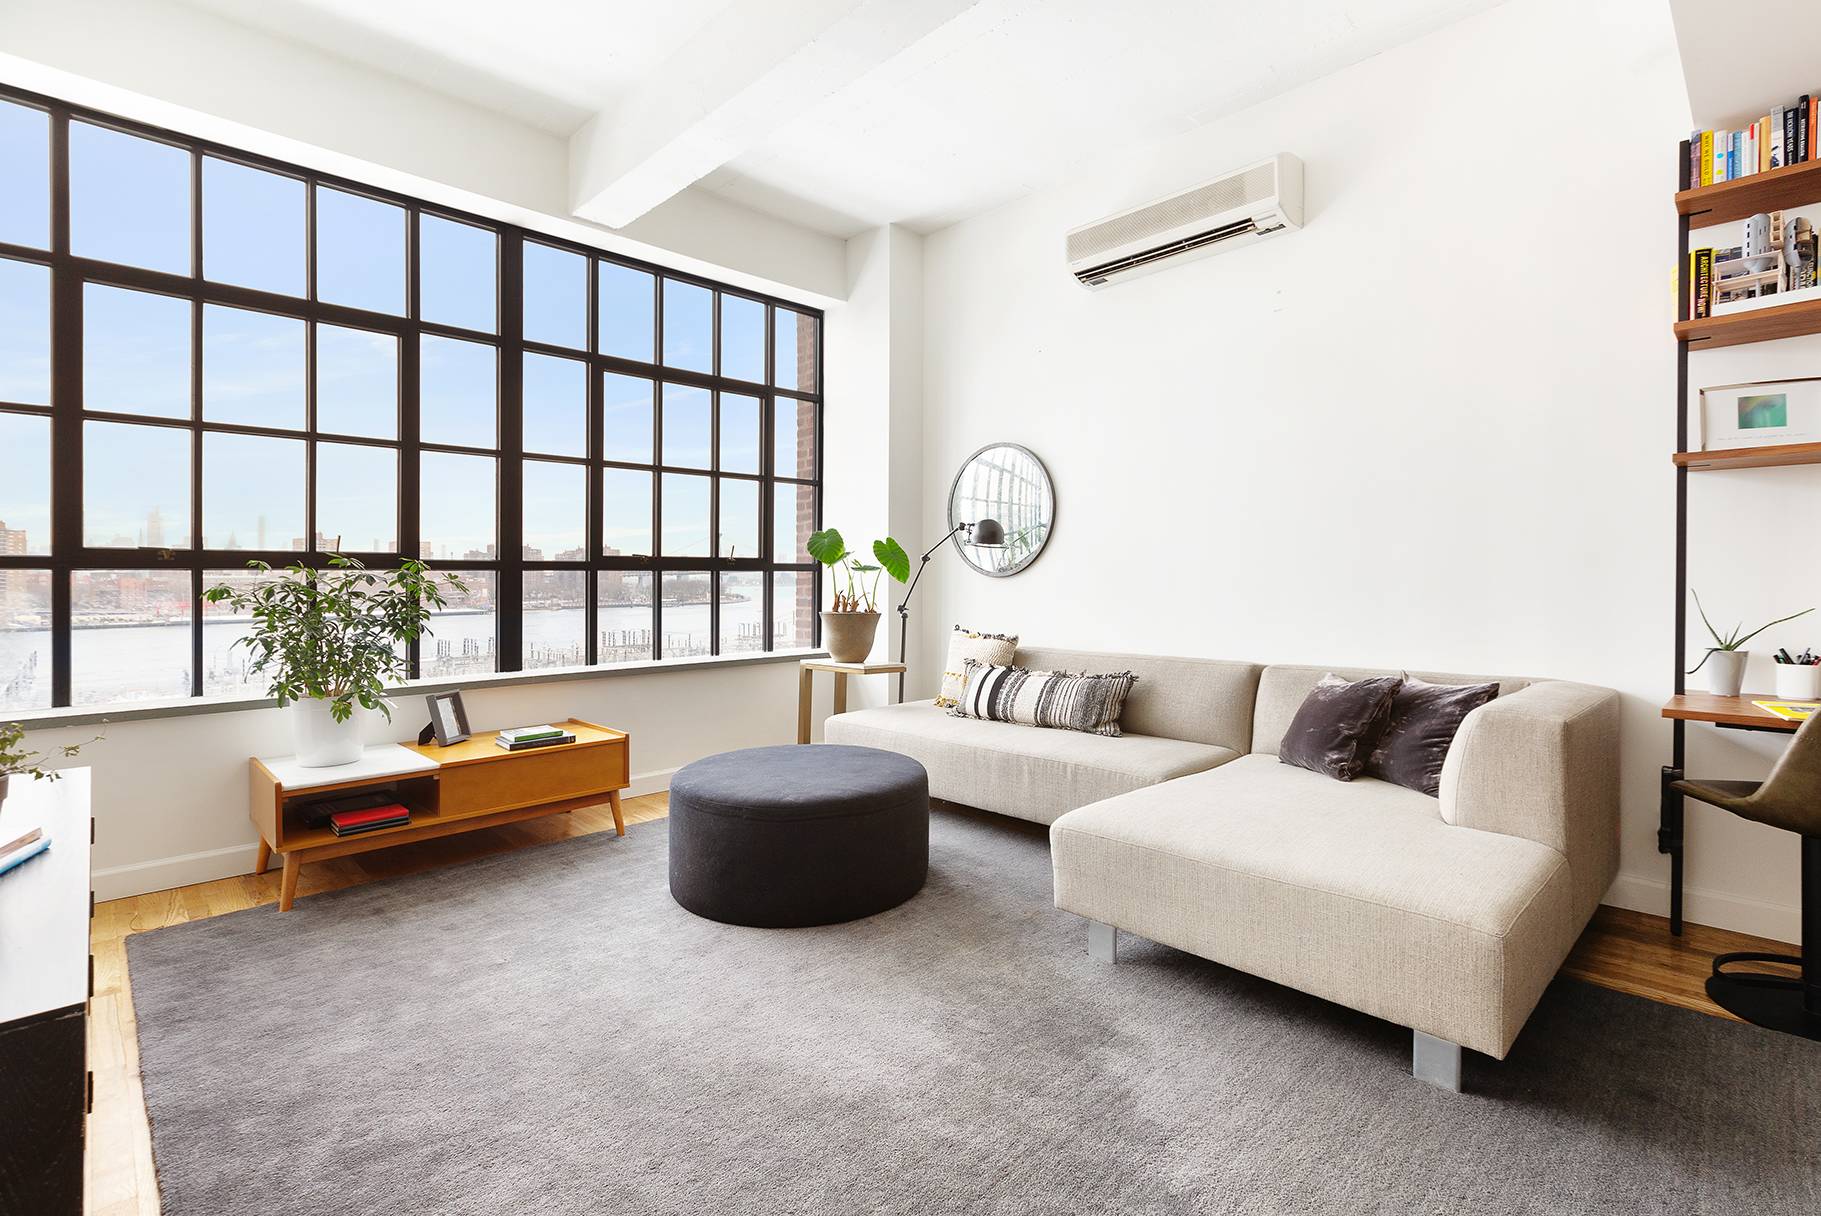 Upon entering the home, you'll be immediately drawn to the wall of industrial style windows facing the East River.